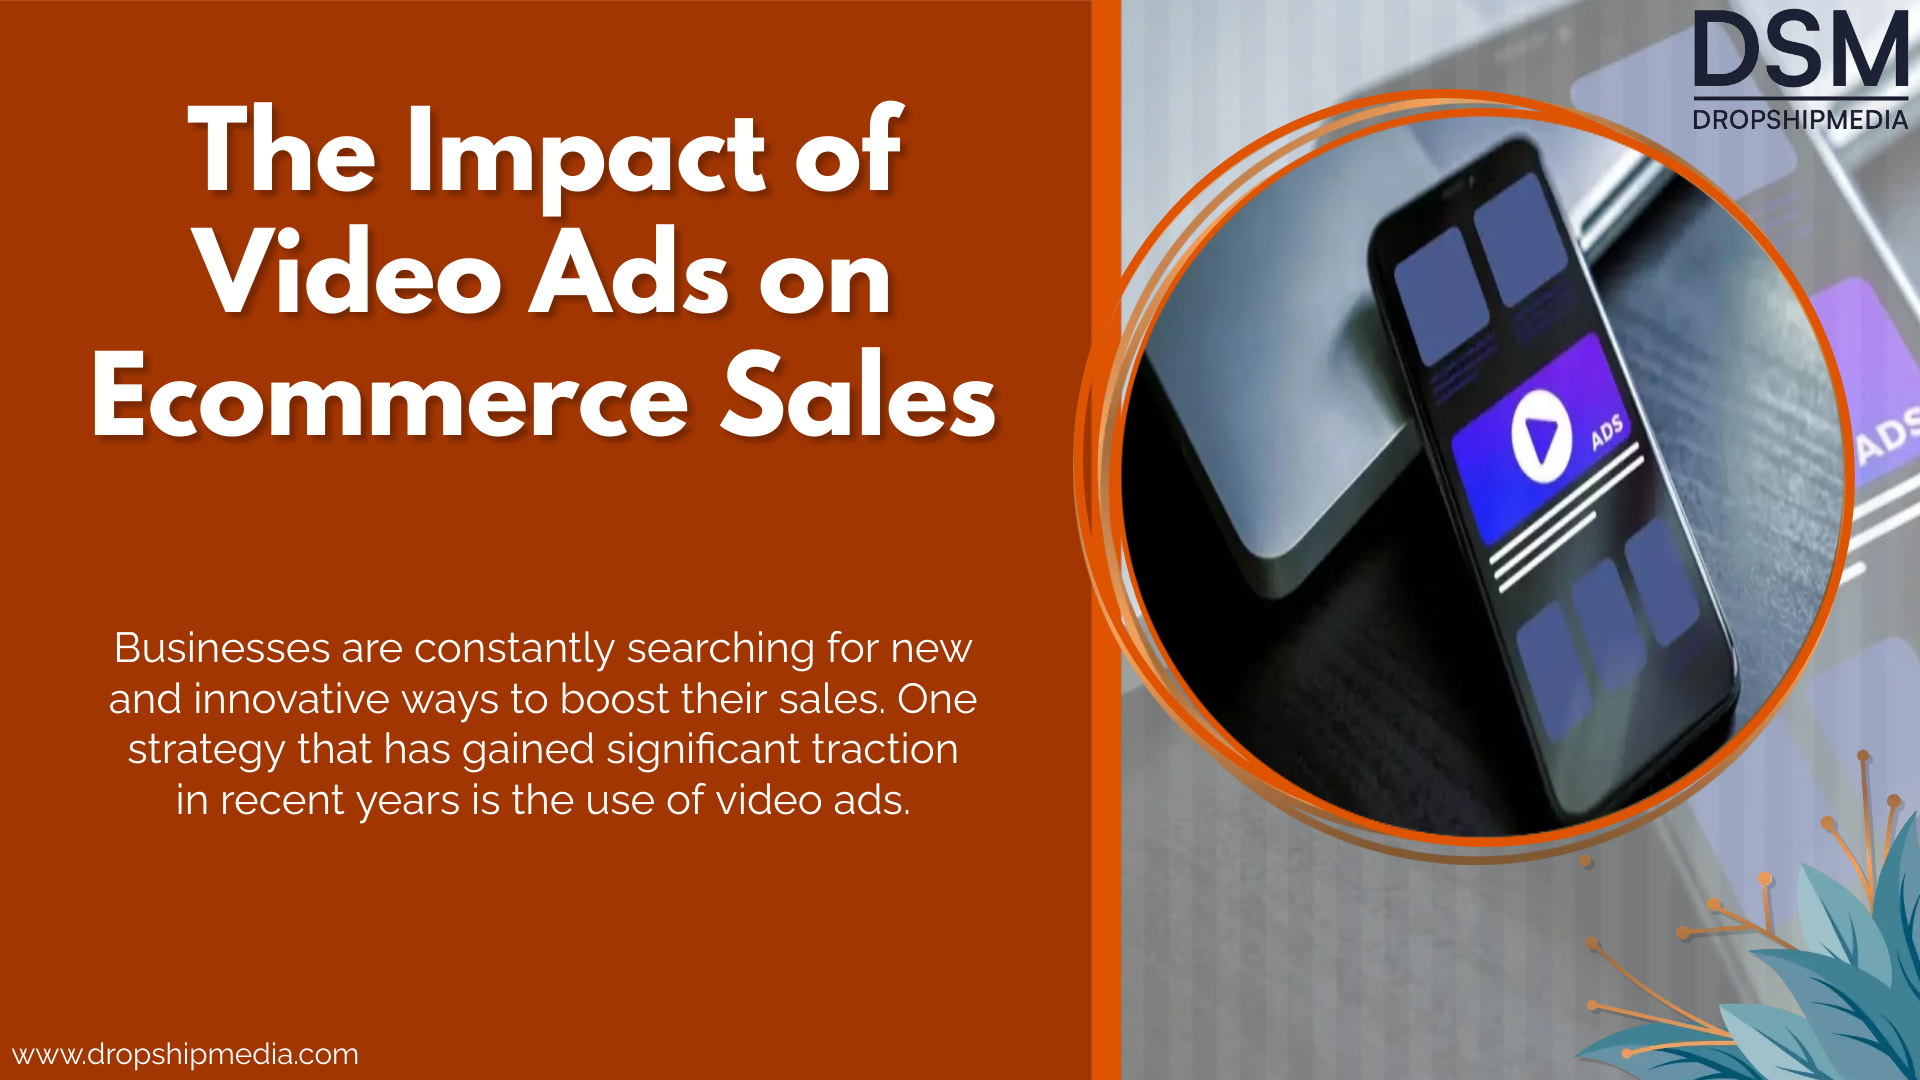 The Impact of Video Ads on Ecommerce Sales